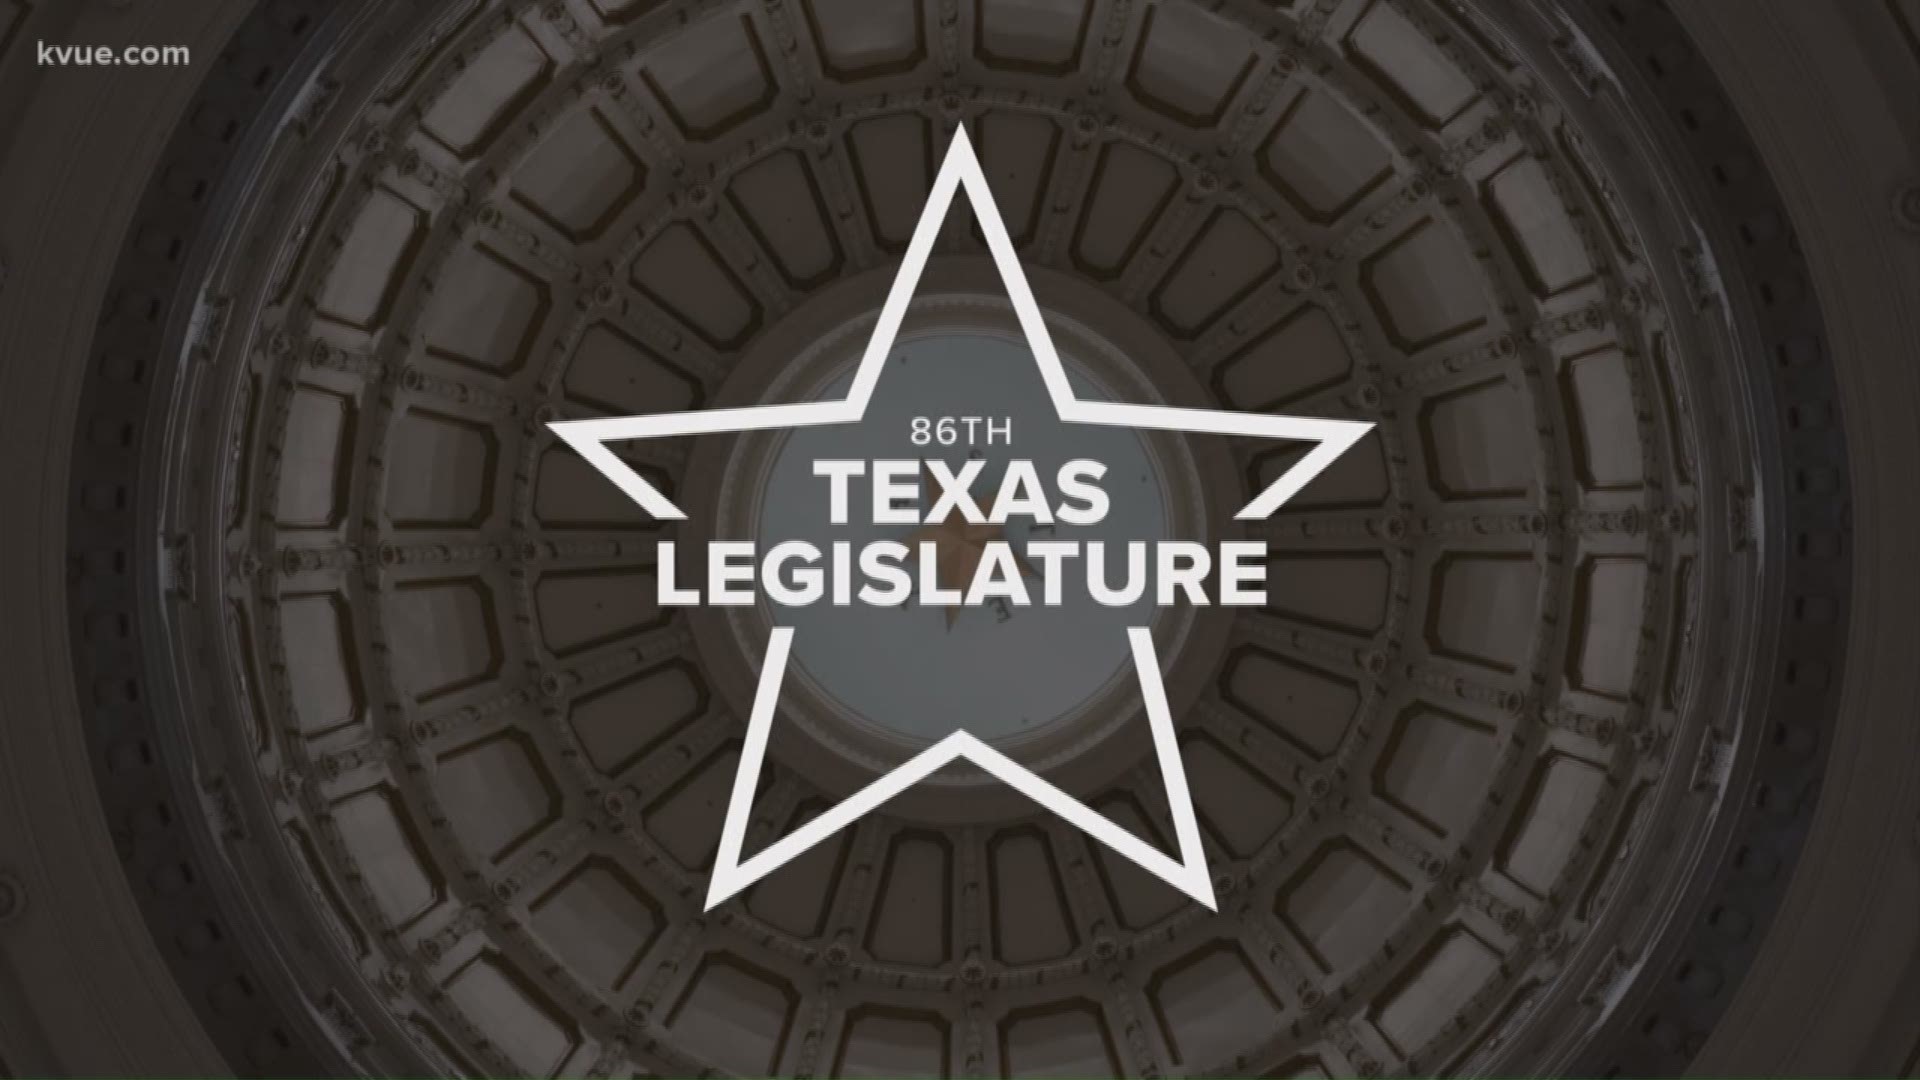 Lawmakers are halfway through this legislative session and they're picking up steam, passing bills on everything from lemonade stands to teacher training.